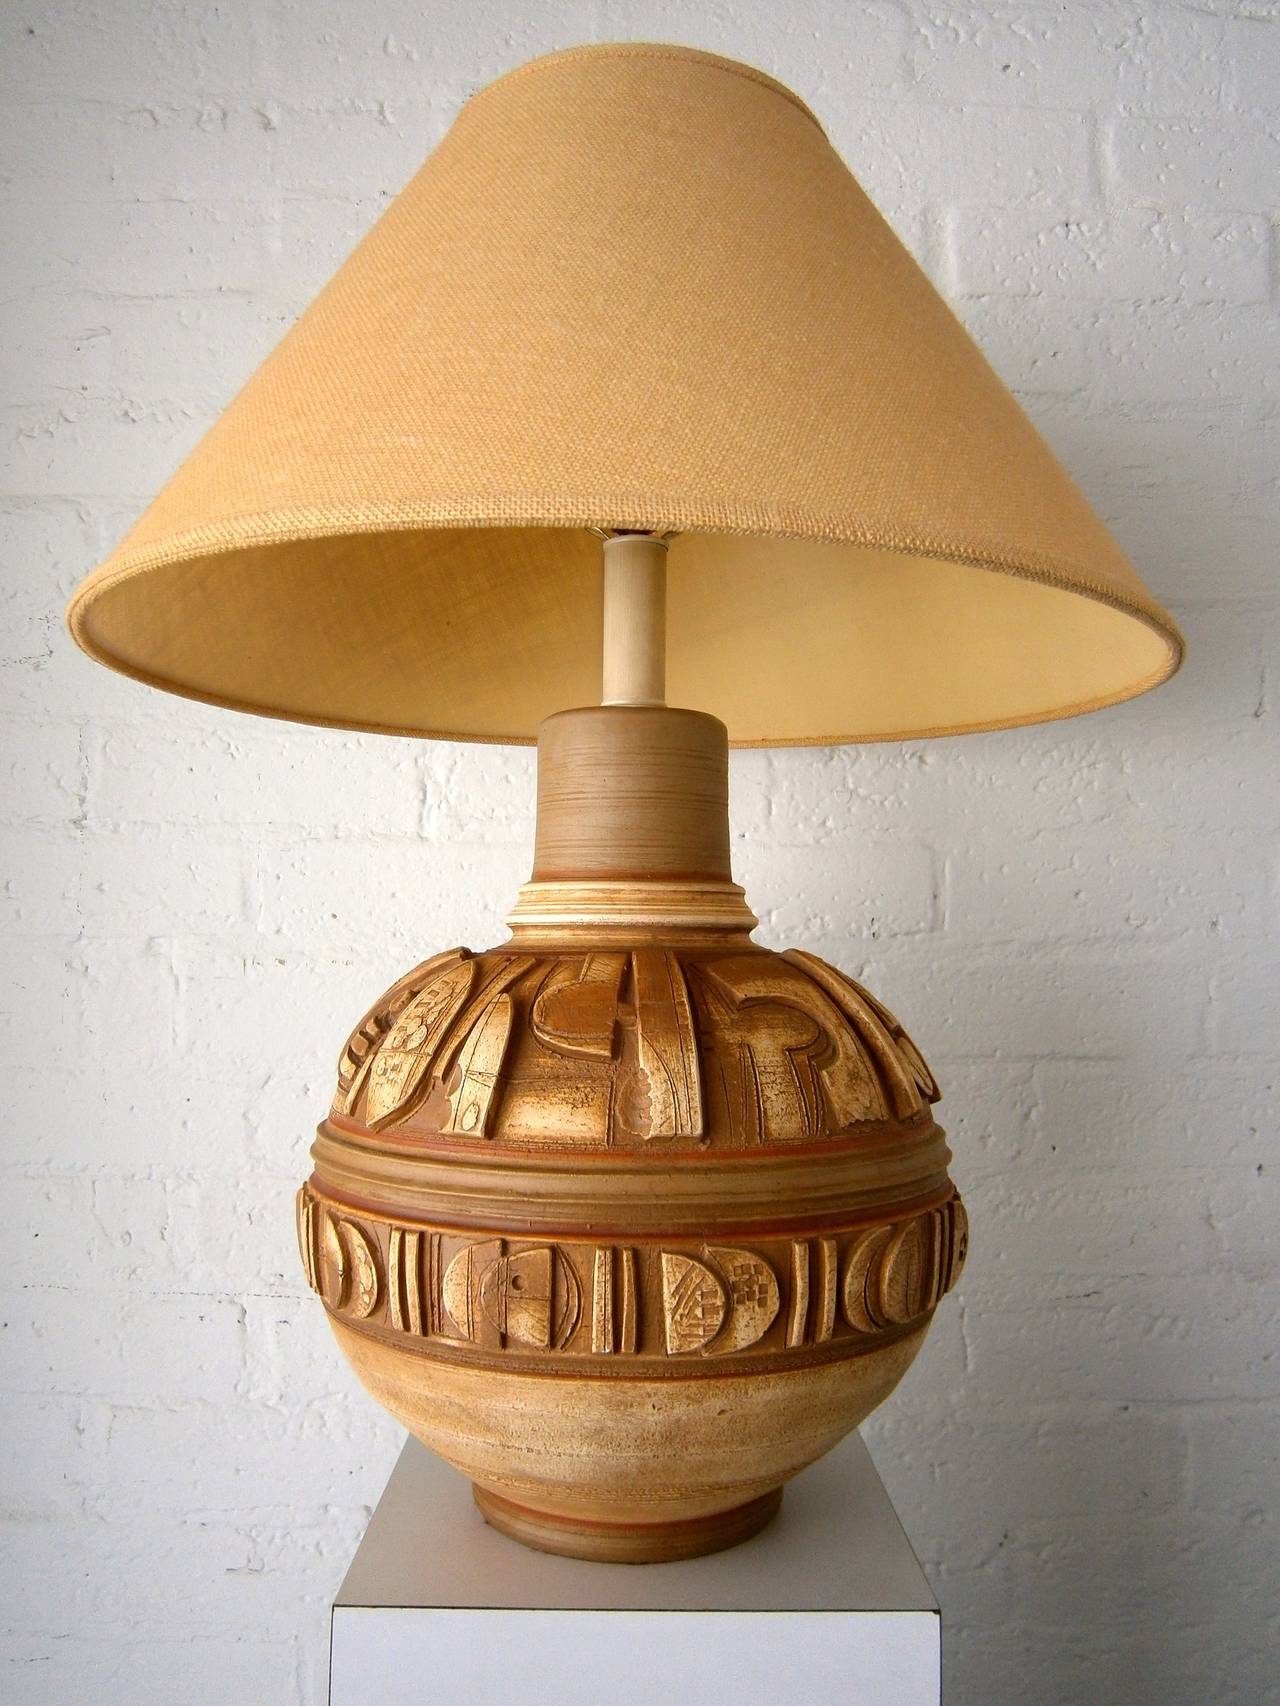 An imposing Mid-Century table lamp by Casual Of California from the 1970s.  The large molded ceramic body of the lamp has been hand-decorated with incised lines and details and then fired with a subtle polychromed glaze.  The base is signed Casual